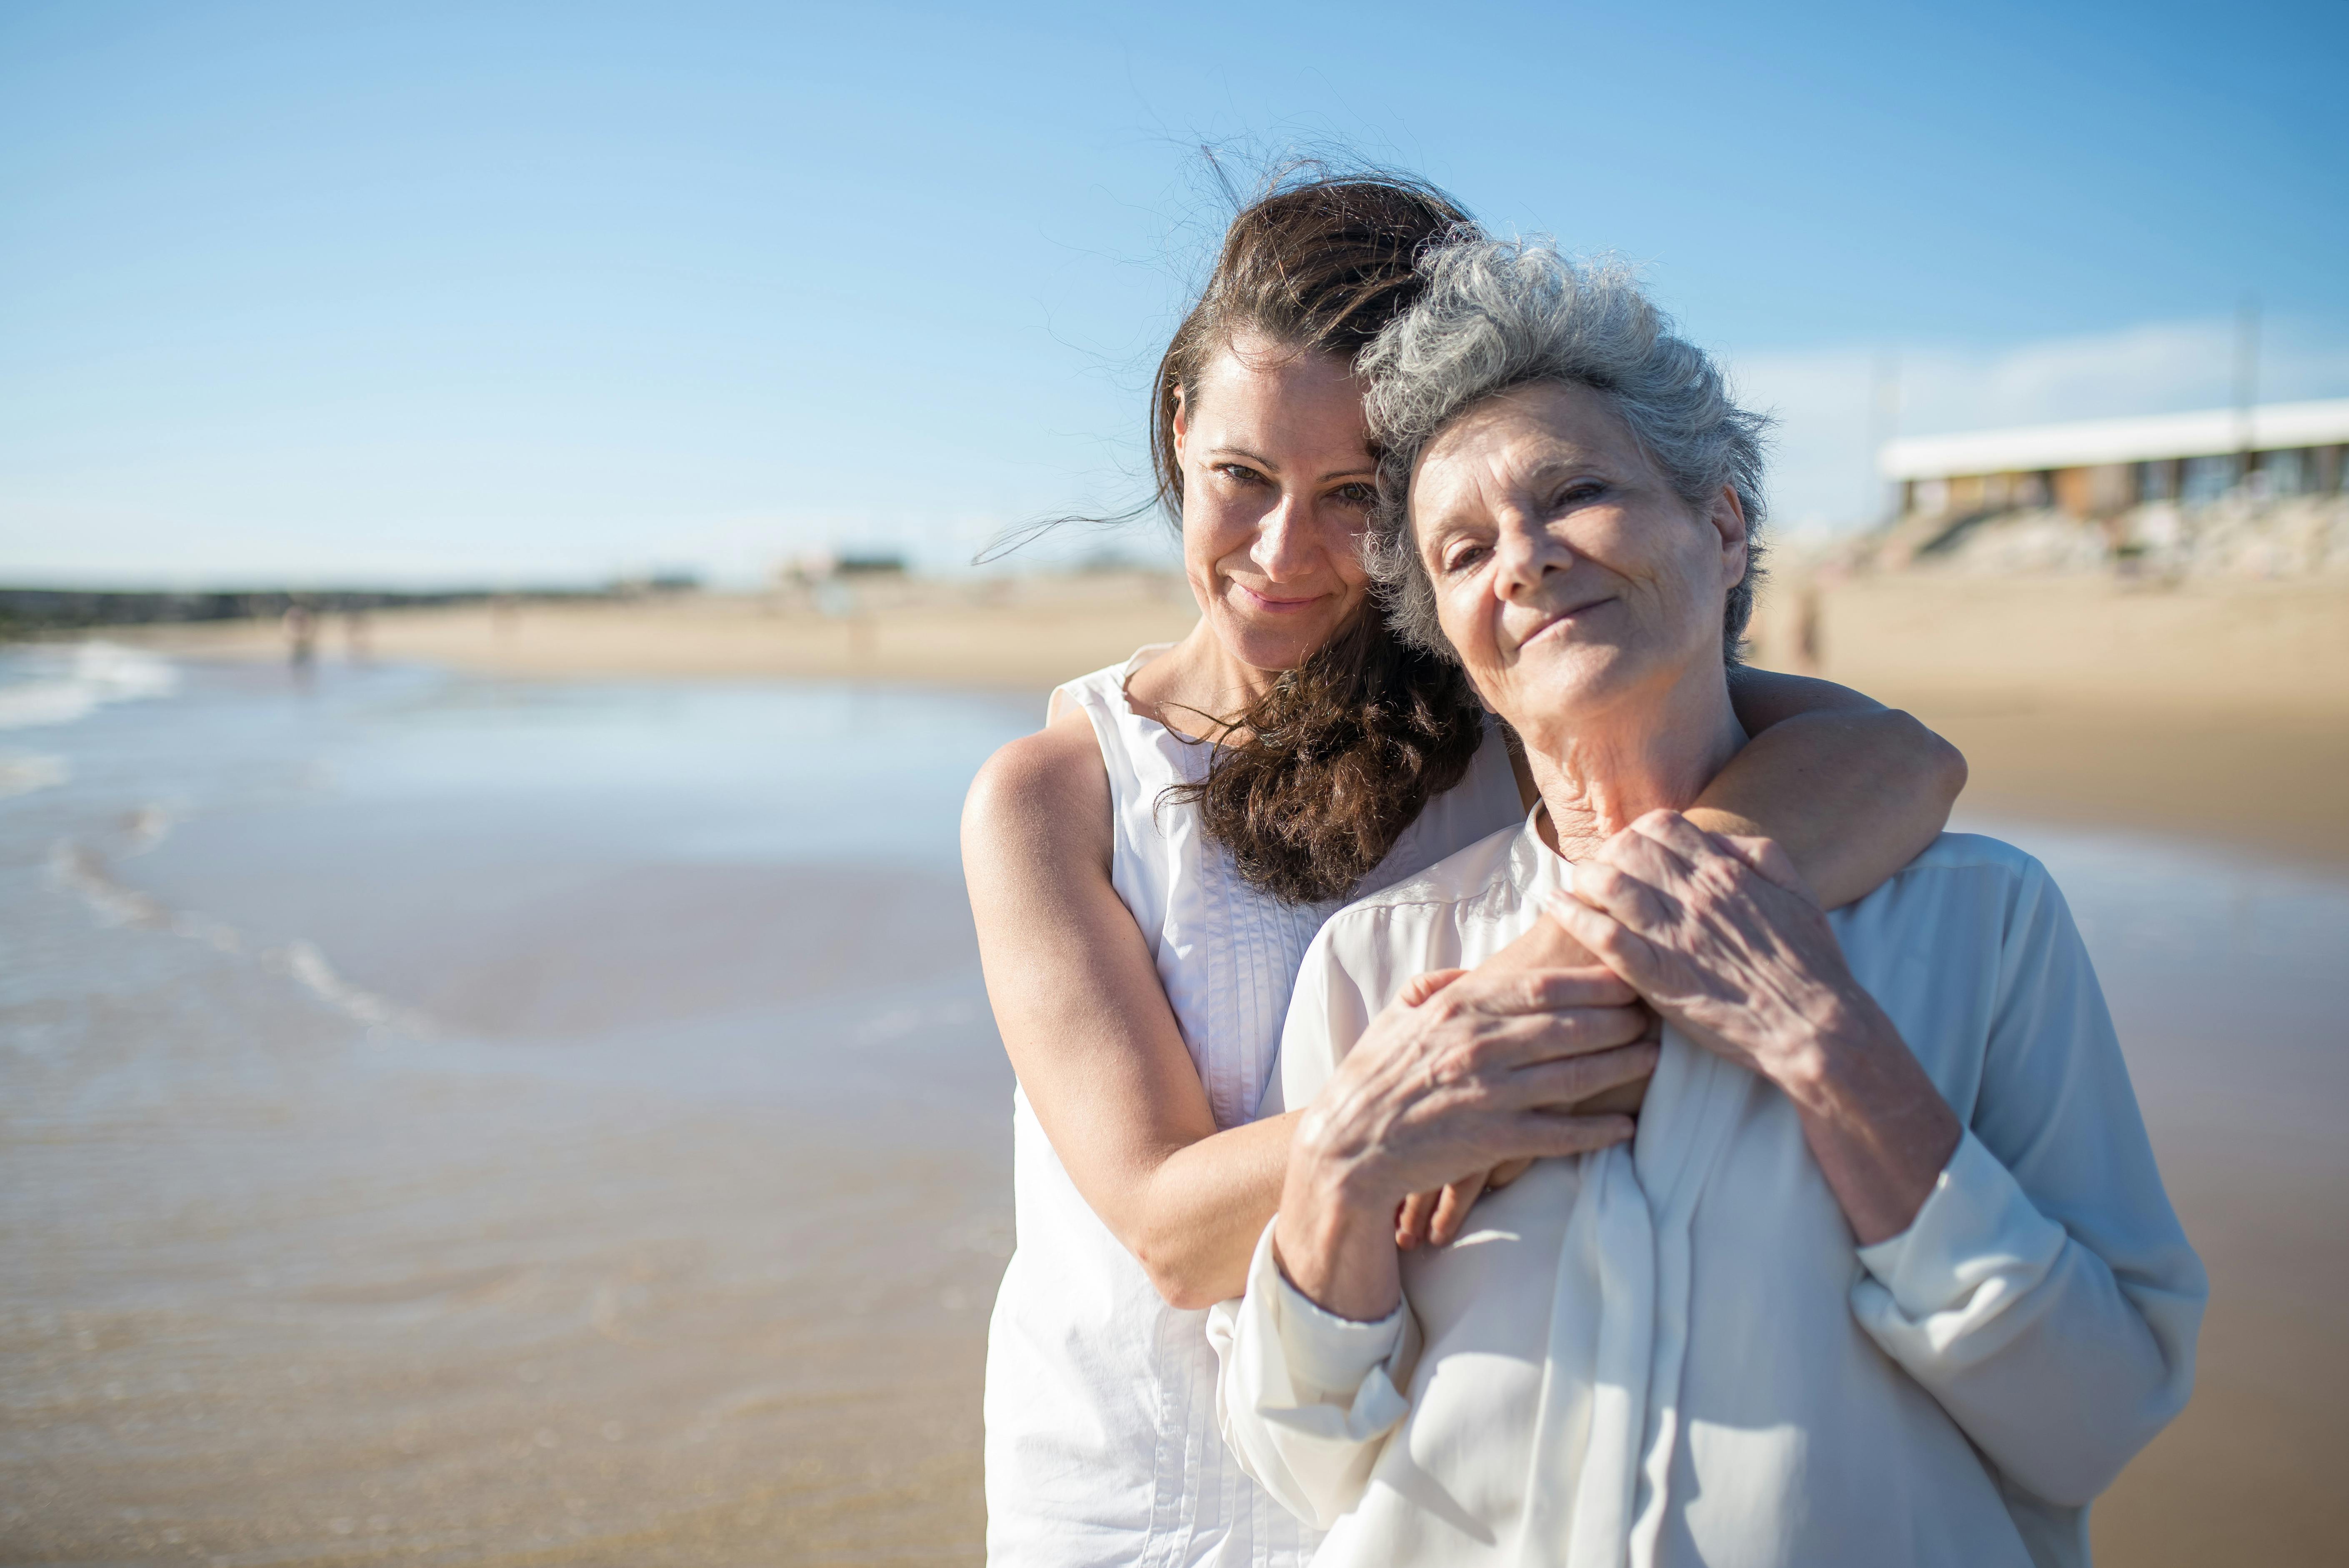 Two happy women embracing on a beachfront | Source: Pexels